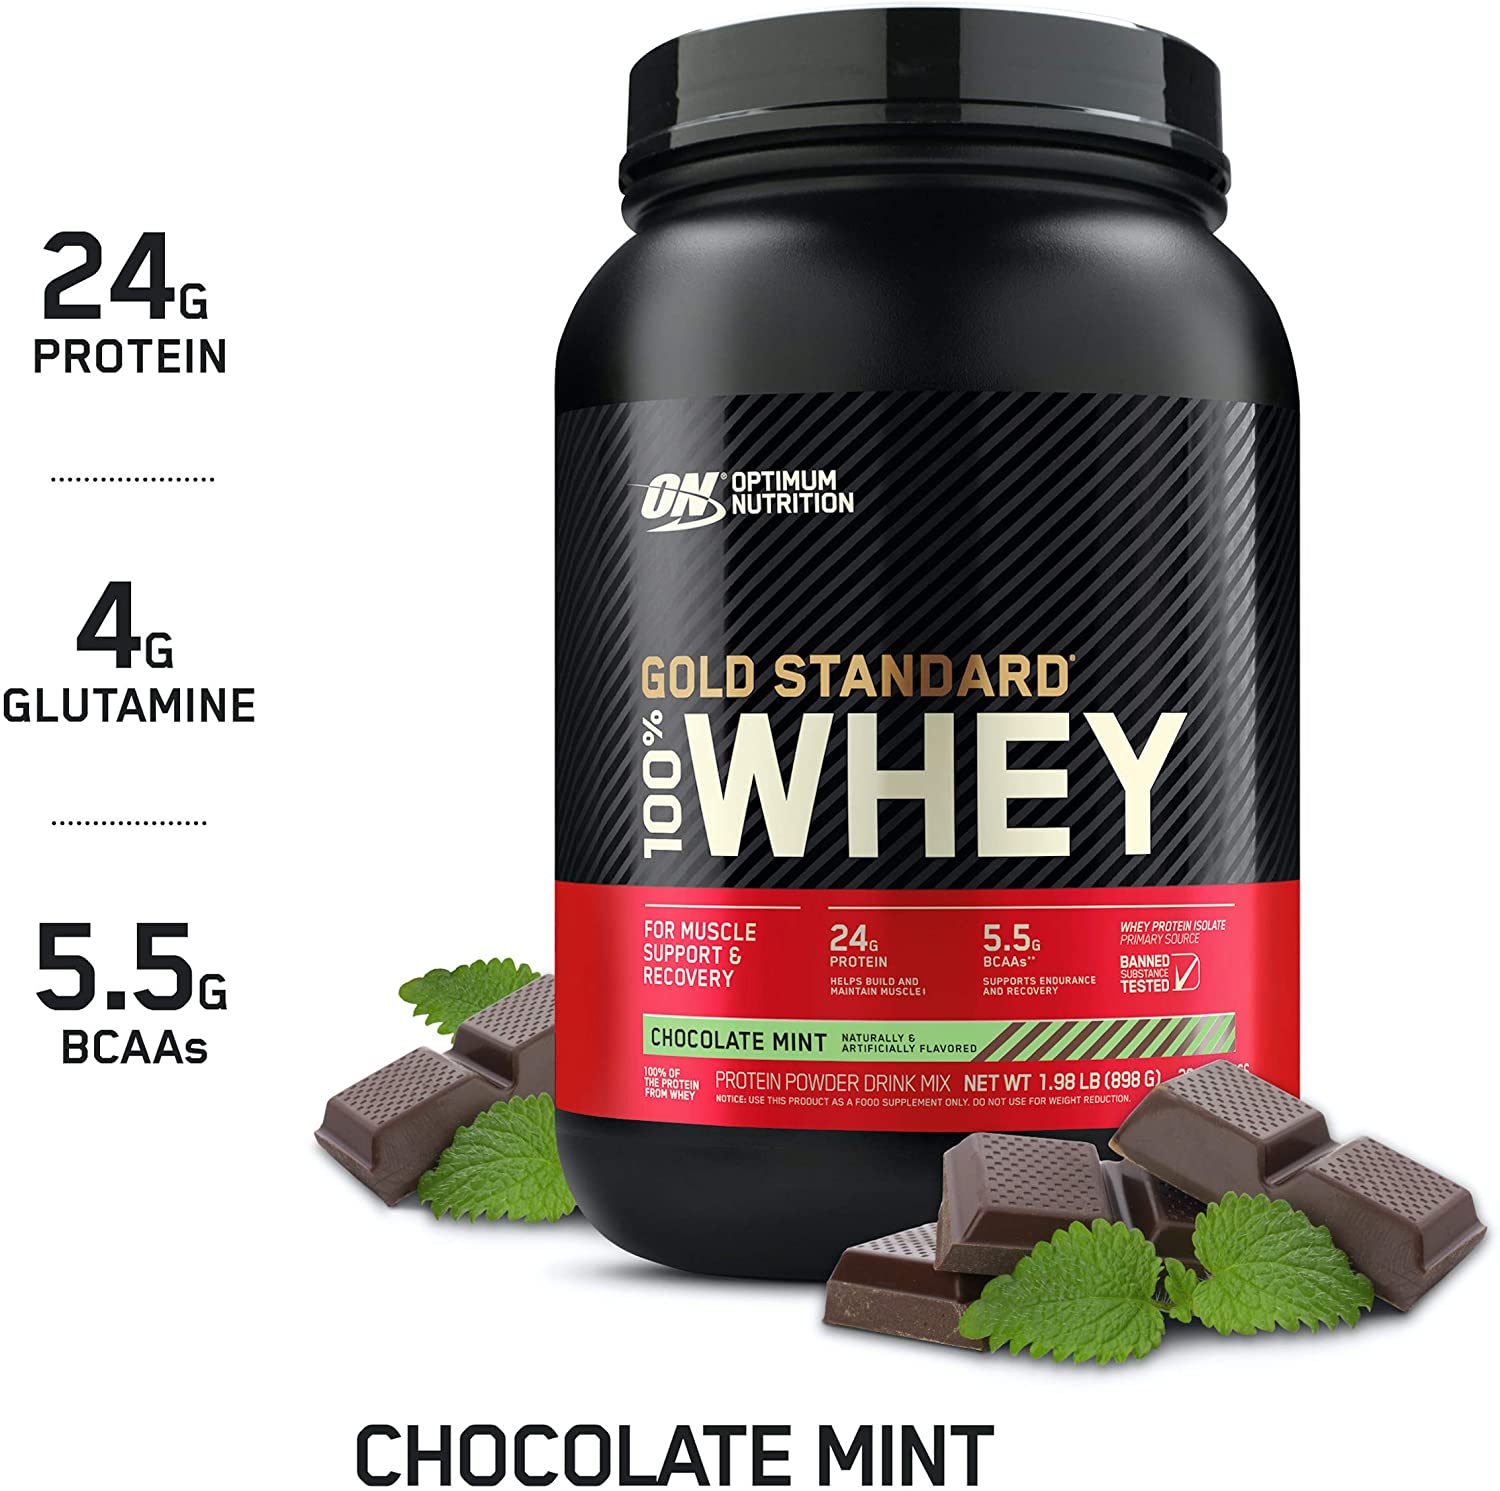 Optimum Nutrition Gold Standard 100% Whey Protein, 2lbs / Chocolate Mint, SNS Health, Sports Nutrition